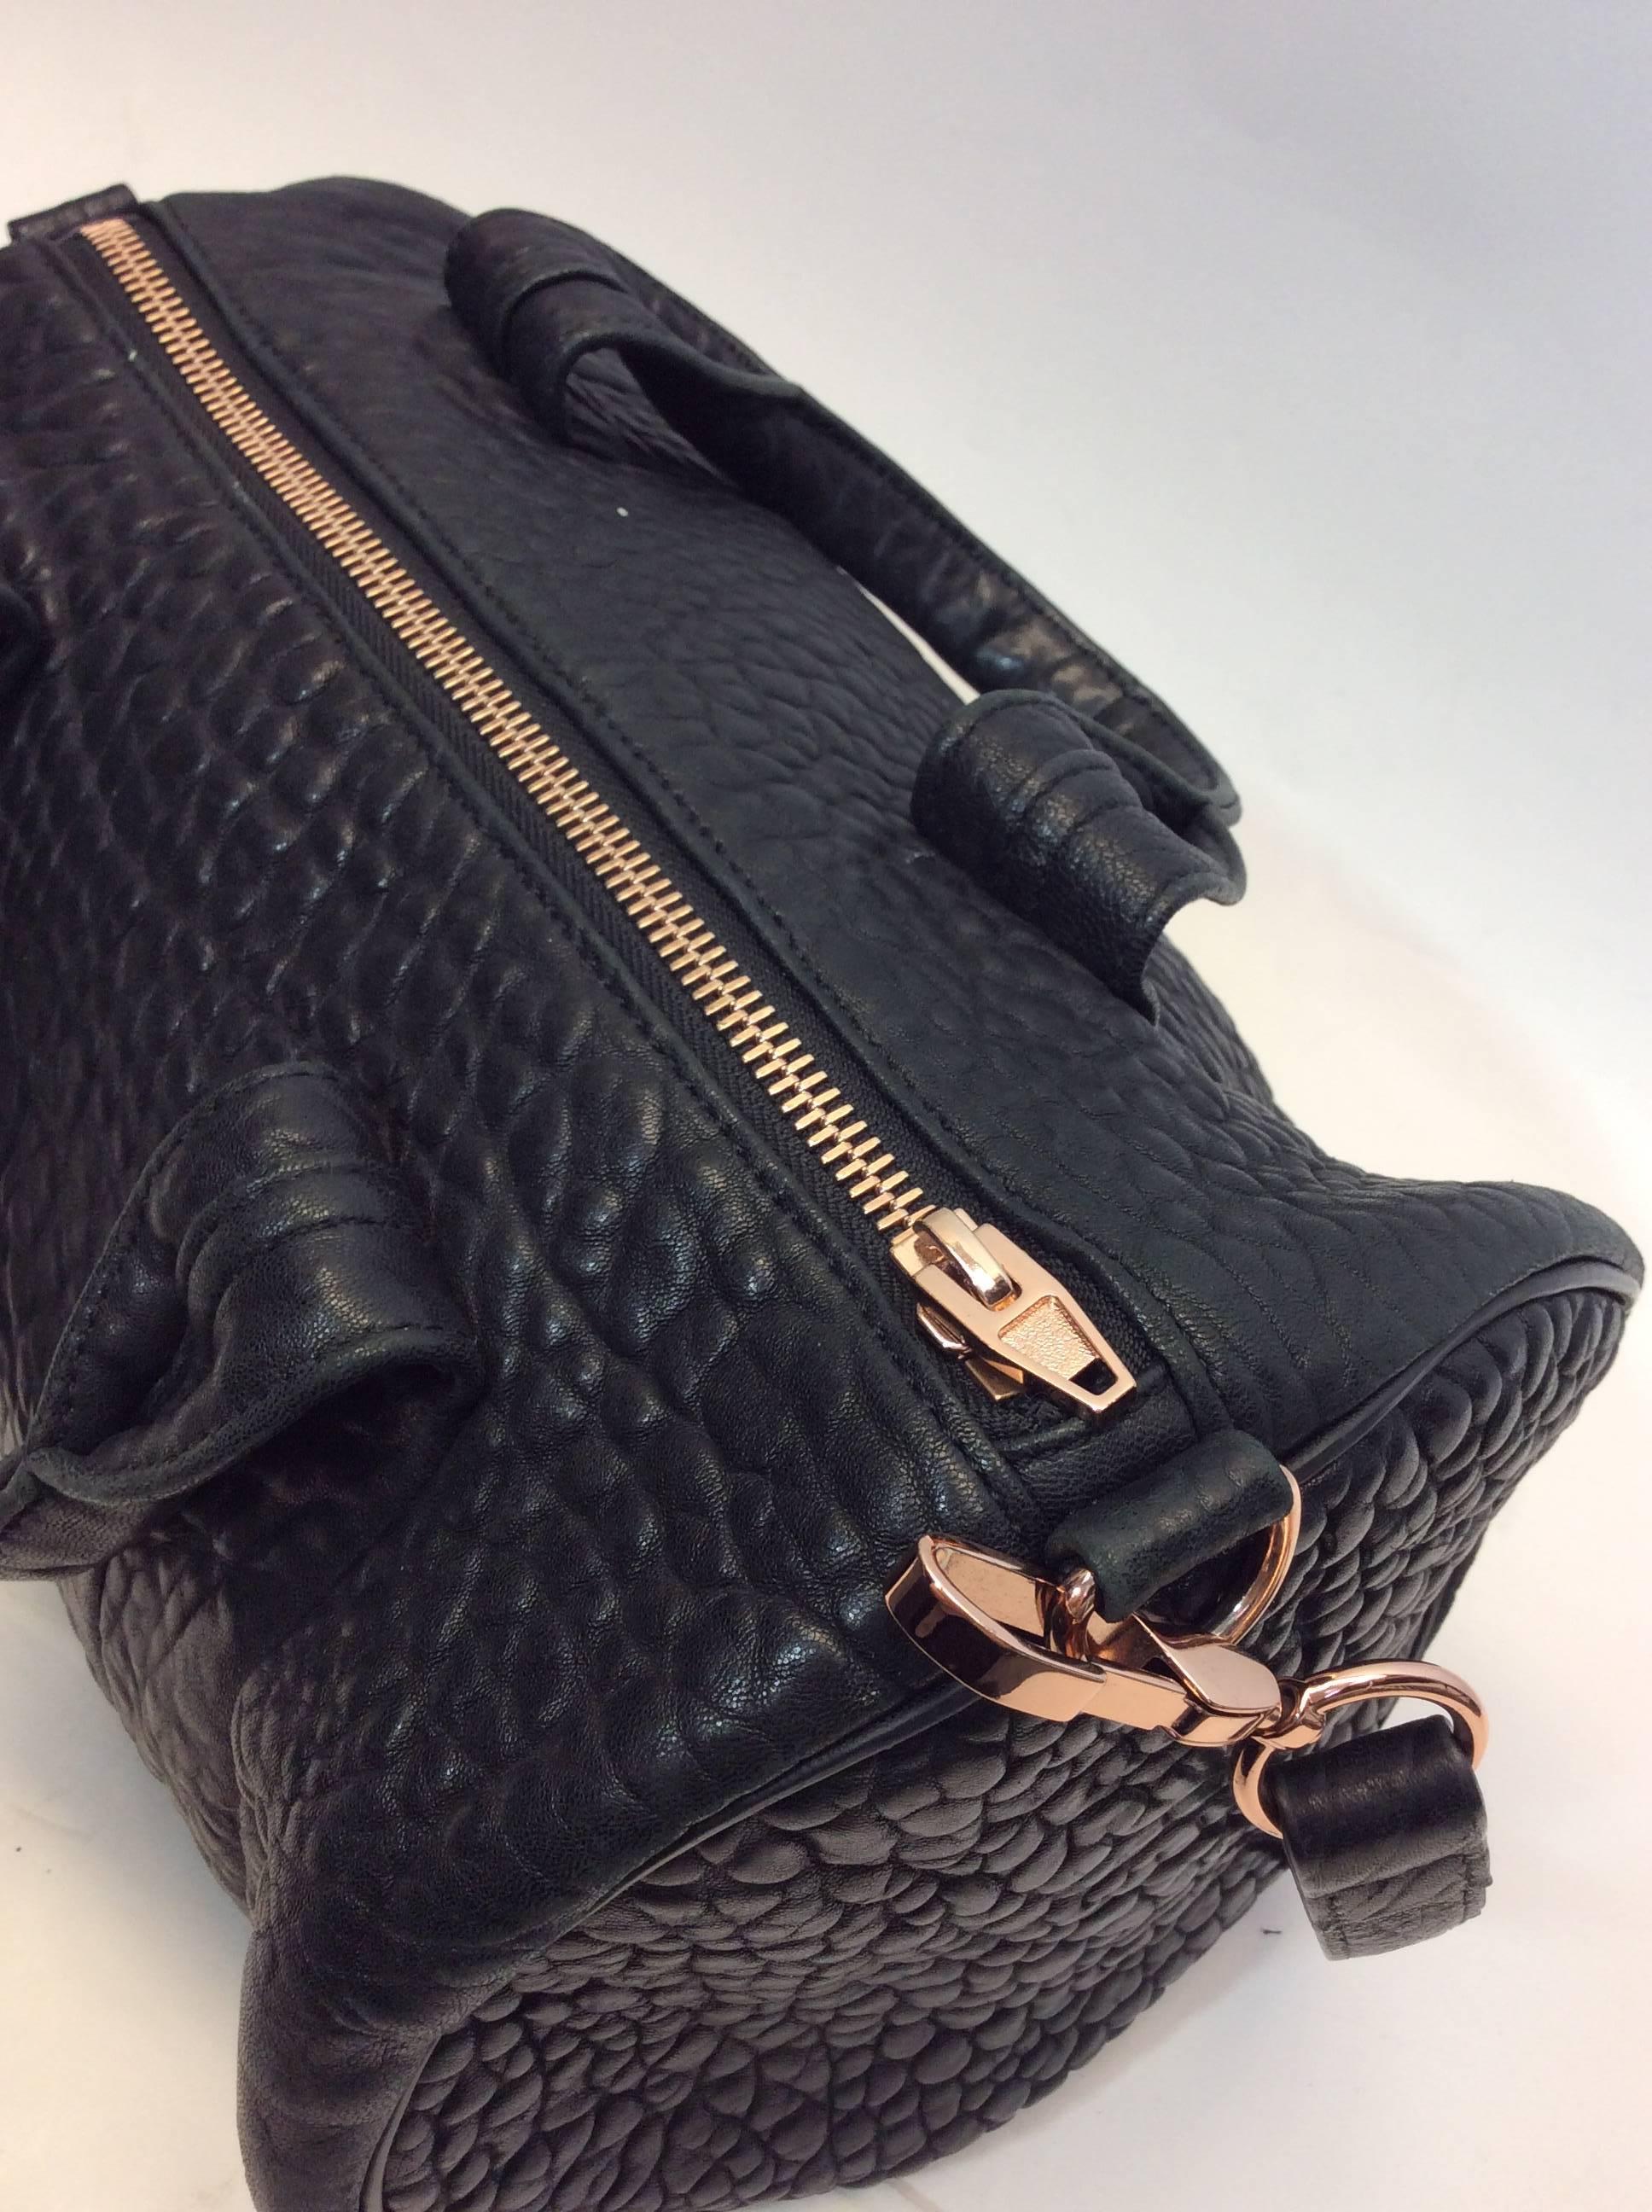 Alexander Wang Black Barrel Bag with Rose Gold Hardware In Excellent Condition For Sale In Narberth, PA